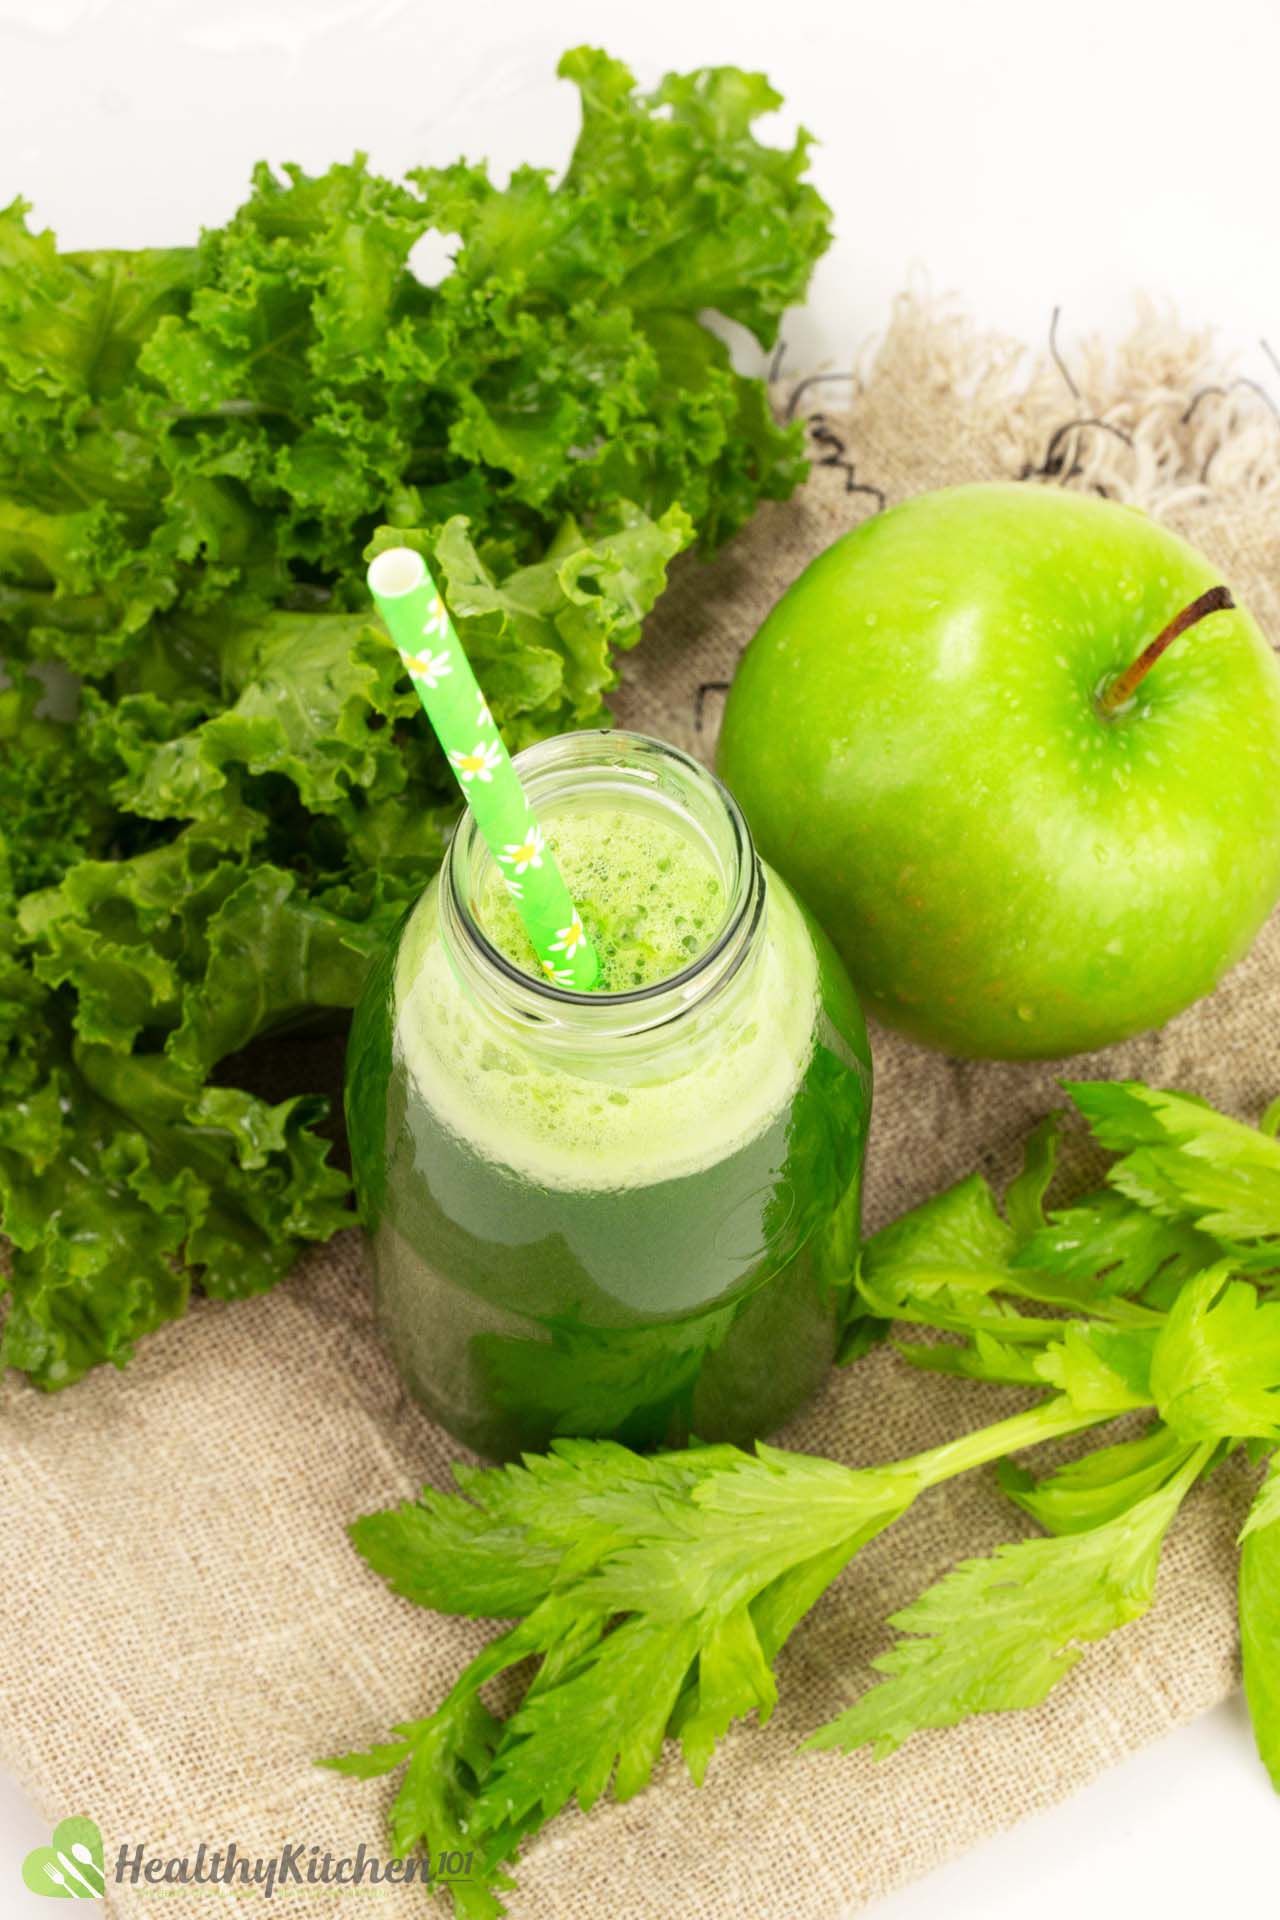 Types of Green Vegetable/ Fruits to Juice